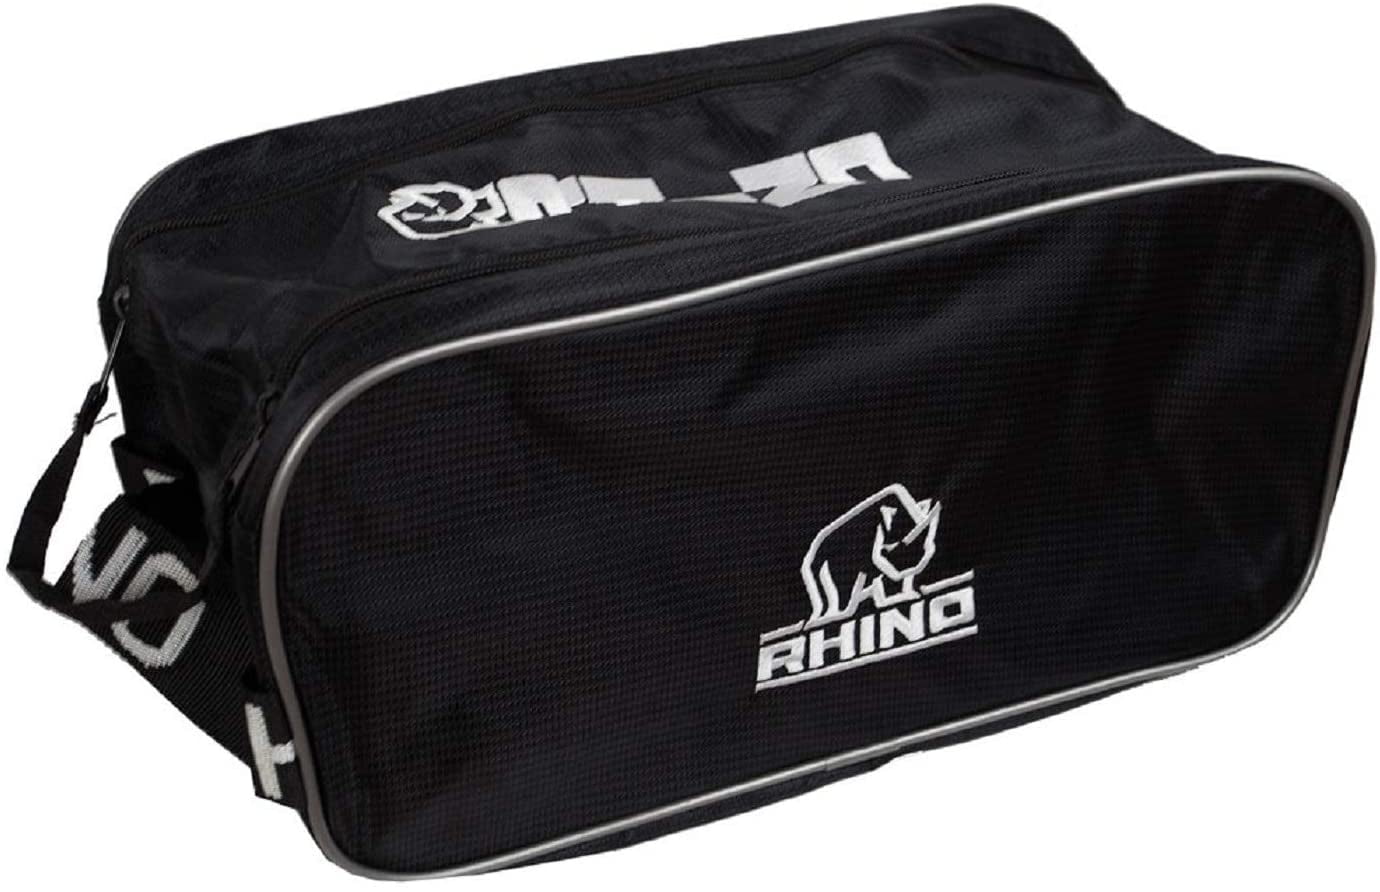 Full-Height Rugby Tackle Bag | Net World Sports